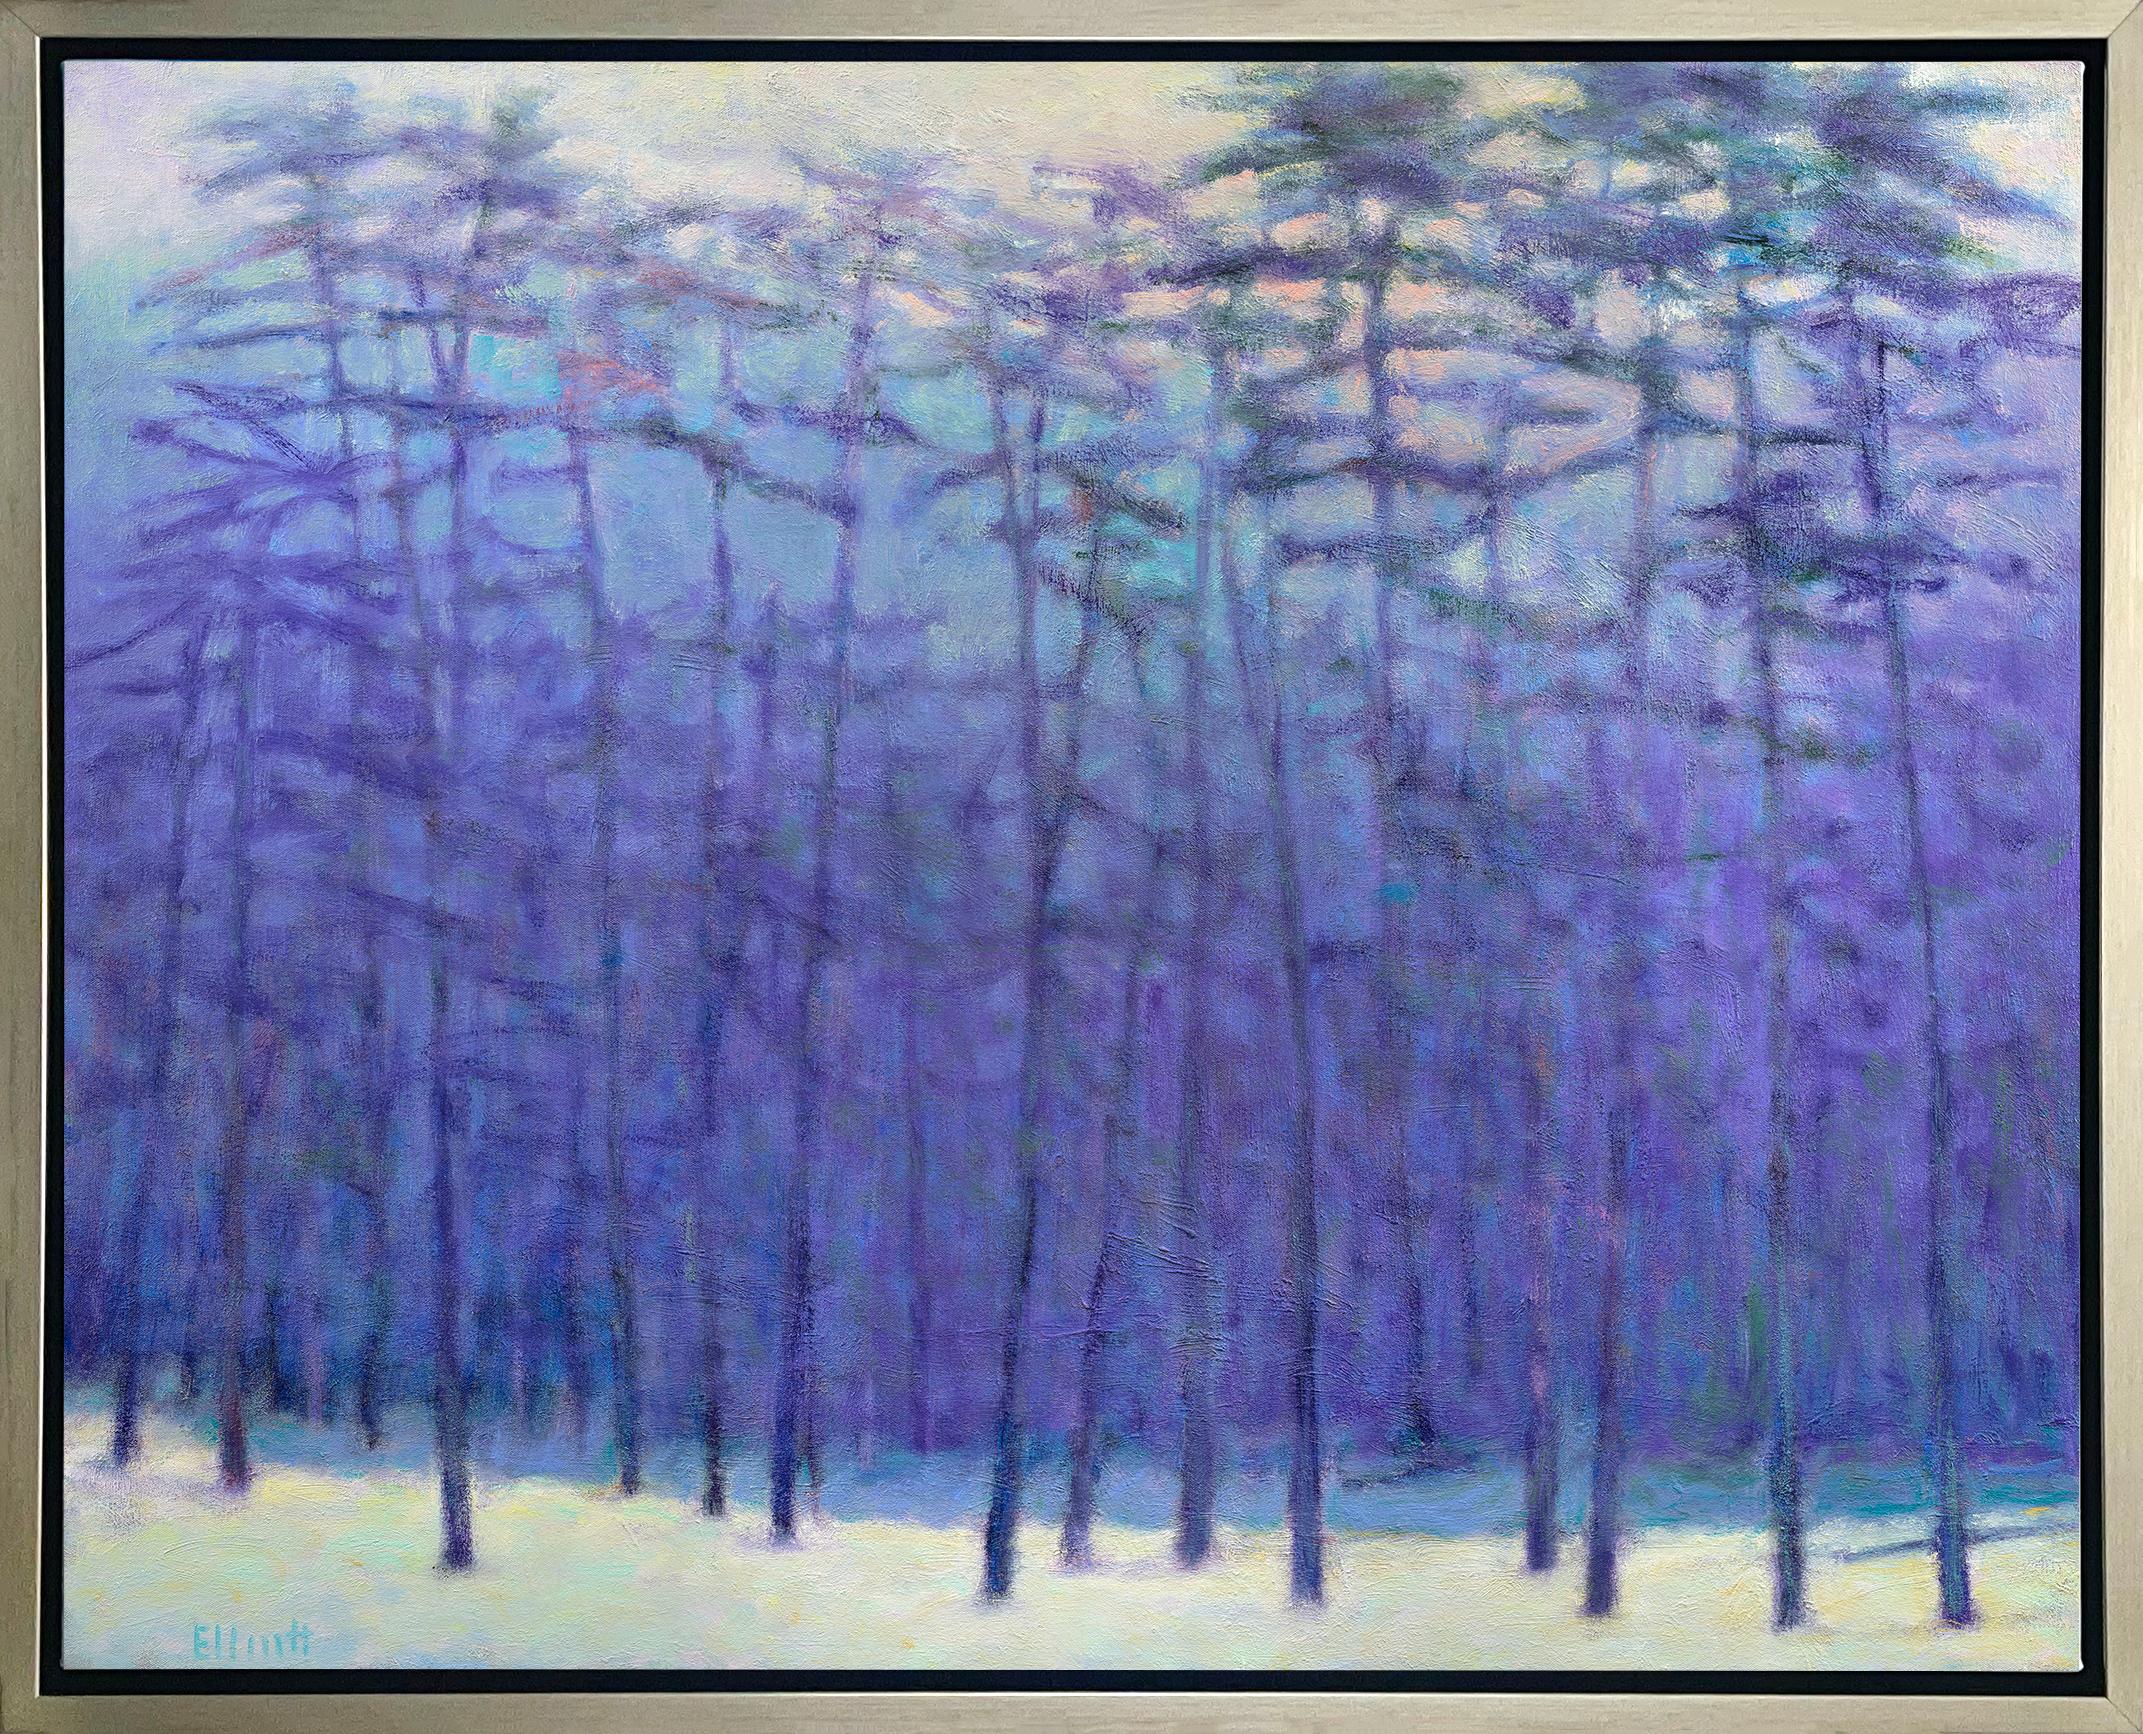 Ken Elliott Abstract Print - "Haze in the Forest, " Framed Limited Edition Giclee Print, 24" x 30"